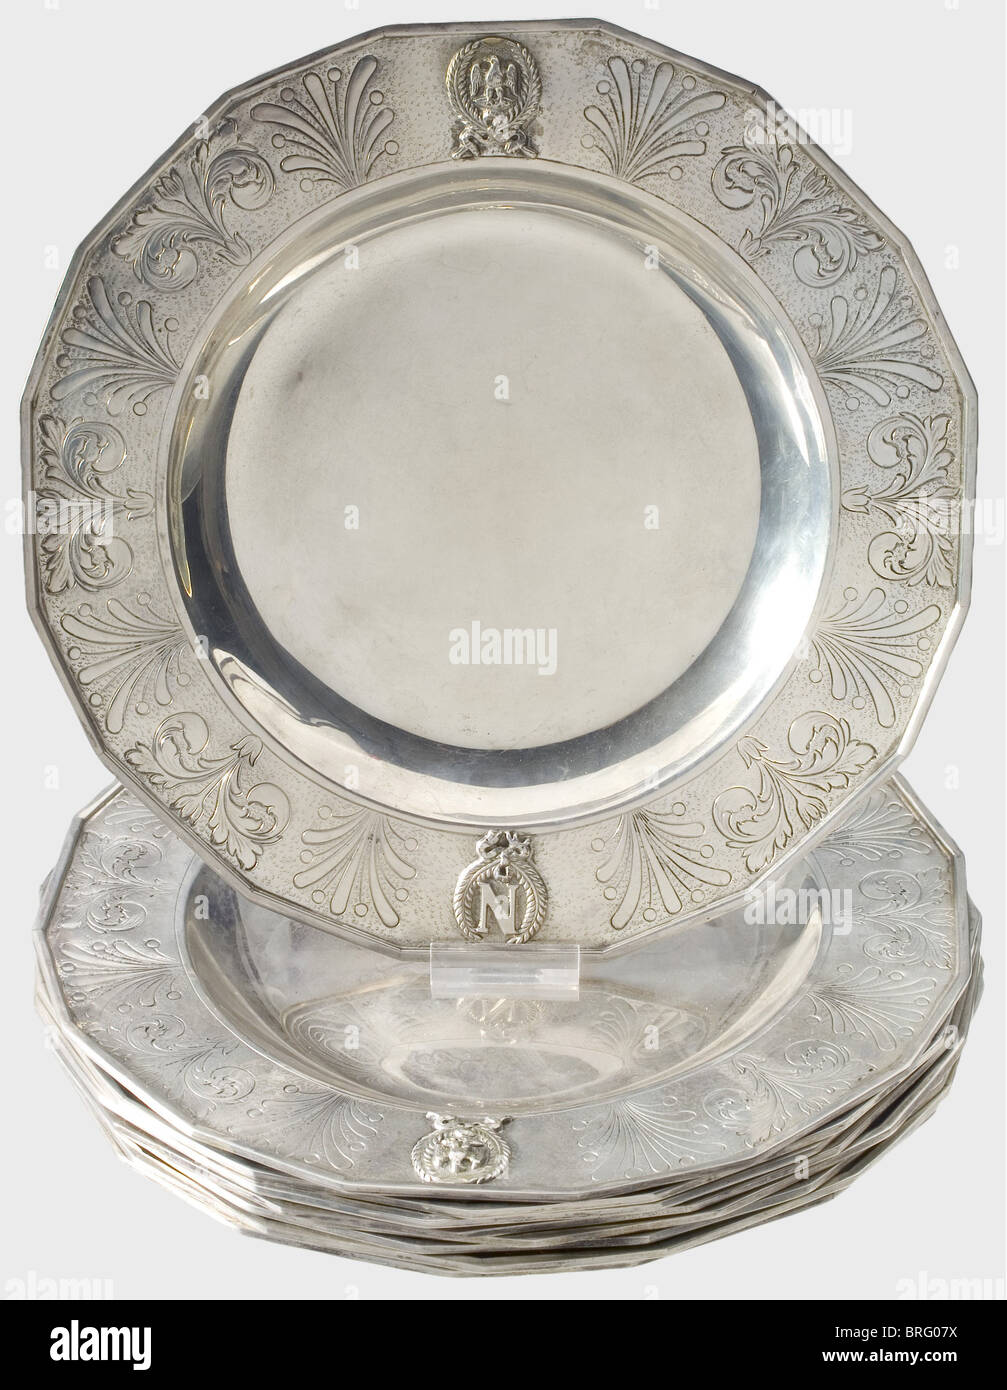 Nine silver plates, in the style of the First Empire, circa 1850. Vacant centres, the borders bear the soldered cipher 'N' in a laurel wreath and the imperial eagle amid engraved acanthus decorations. The edge molding is also soldered. The bottom displays the Parisian hallmark for the period 1798 - 1809 as well as the mark for the famous silversmith Jean Baptiste Claude Odiot (1763 - 1850). historic, historical, 19th century, dishes, dish, plate, plates, object, objects, stills, clipping, clippings, cut out, cut-out, cut-outs, Additional-Rights-Clearences-Not Available Stock Photo